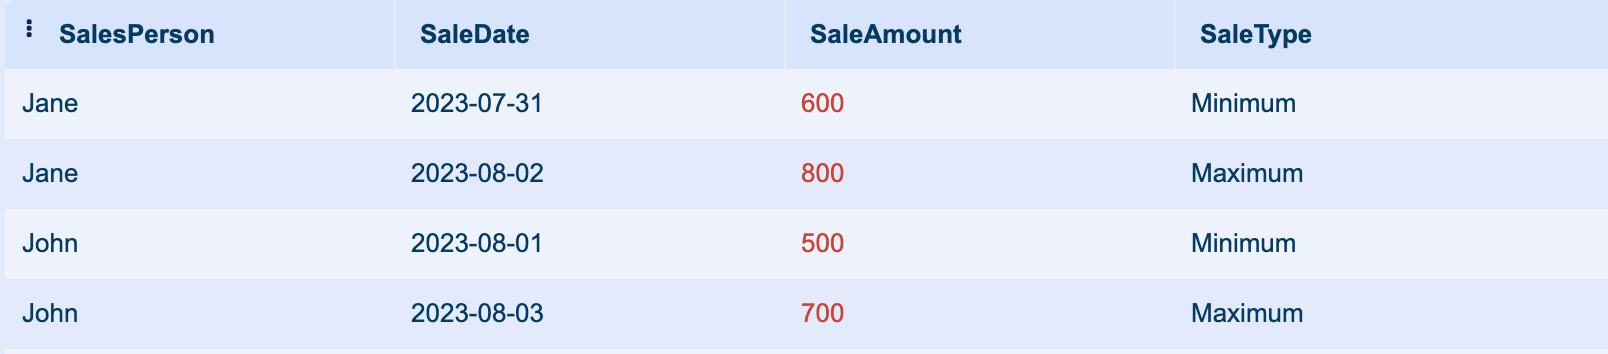 The output shows the maximum and minimum sales for each Sales Person